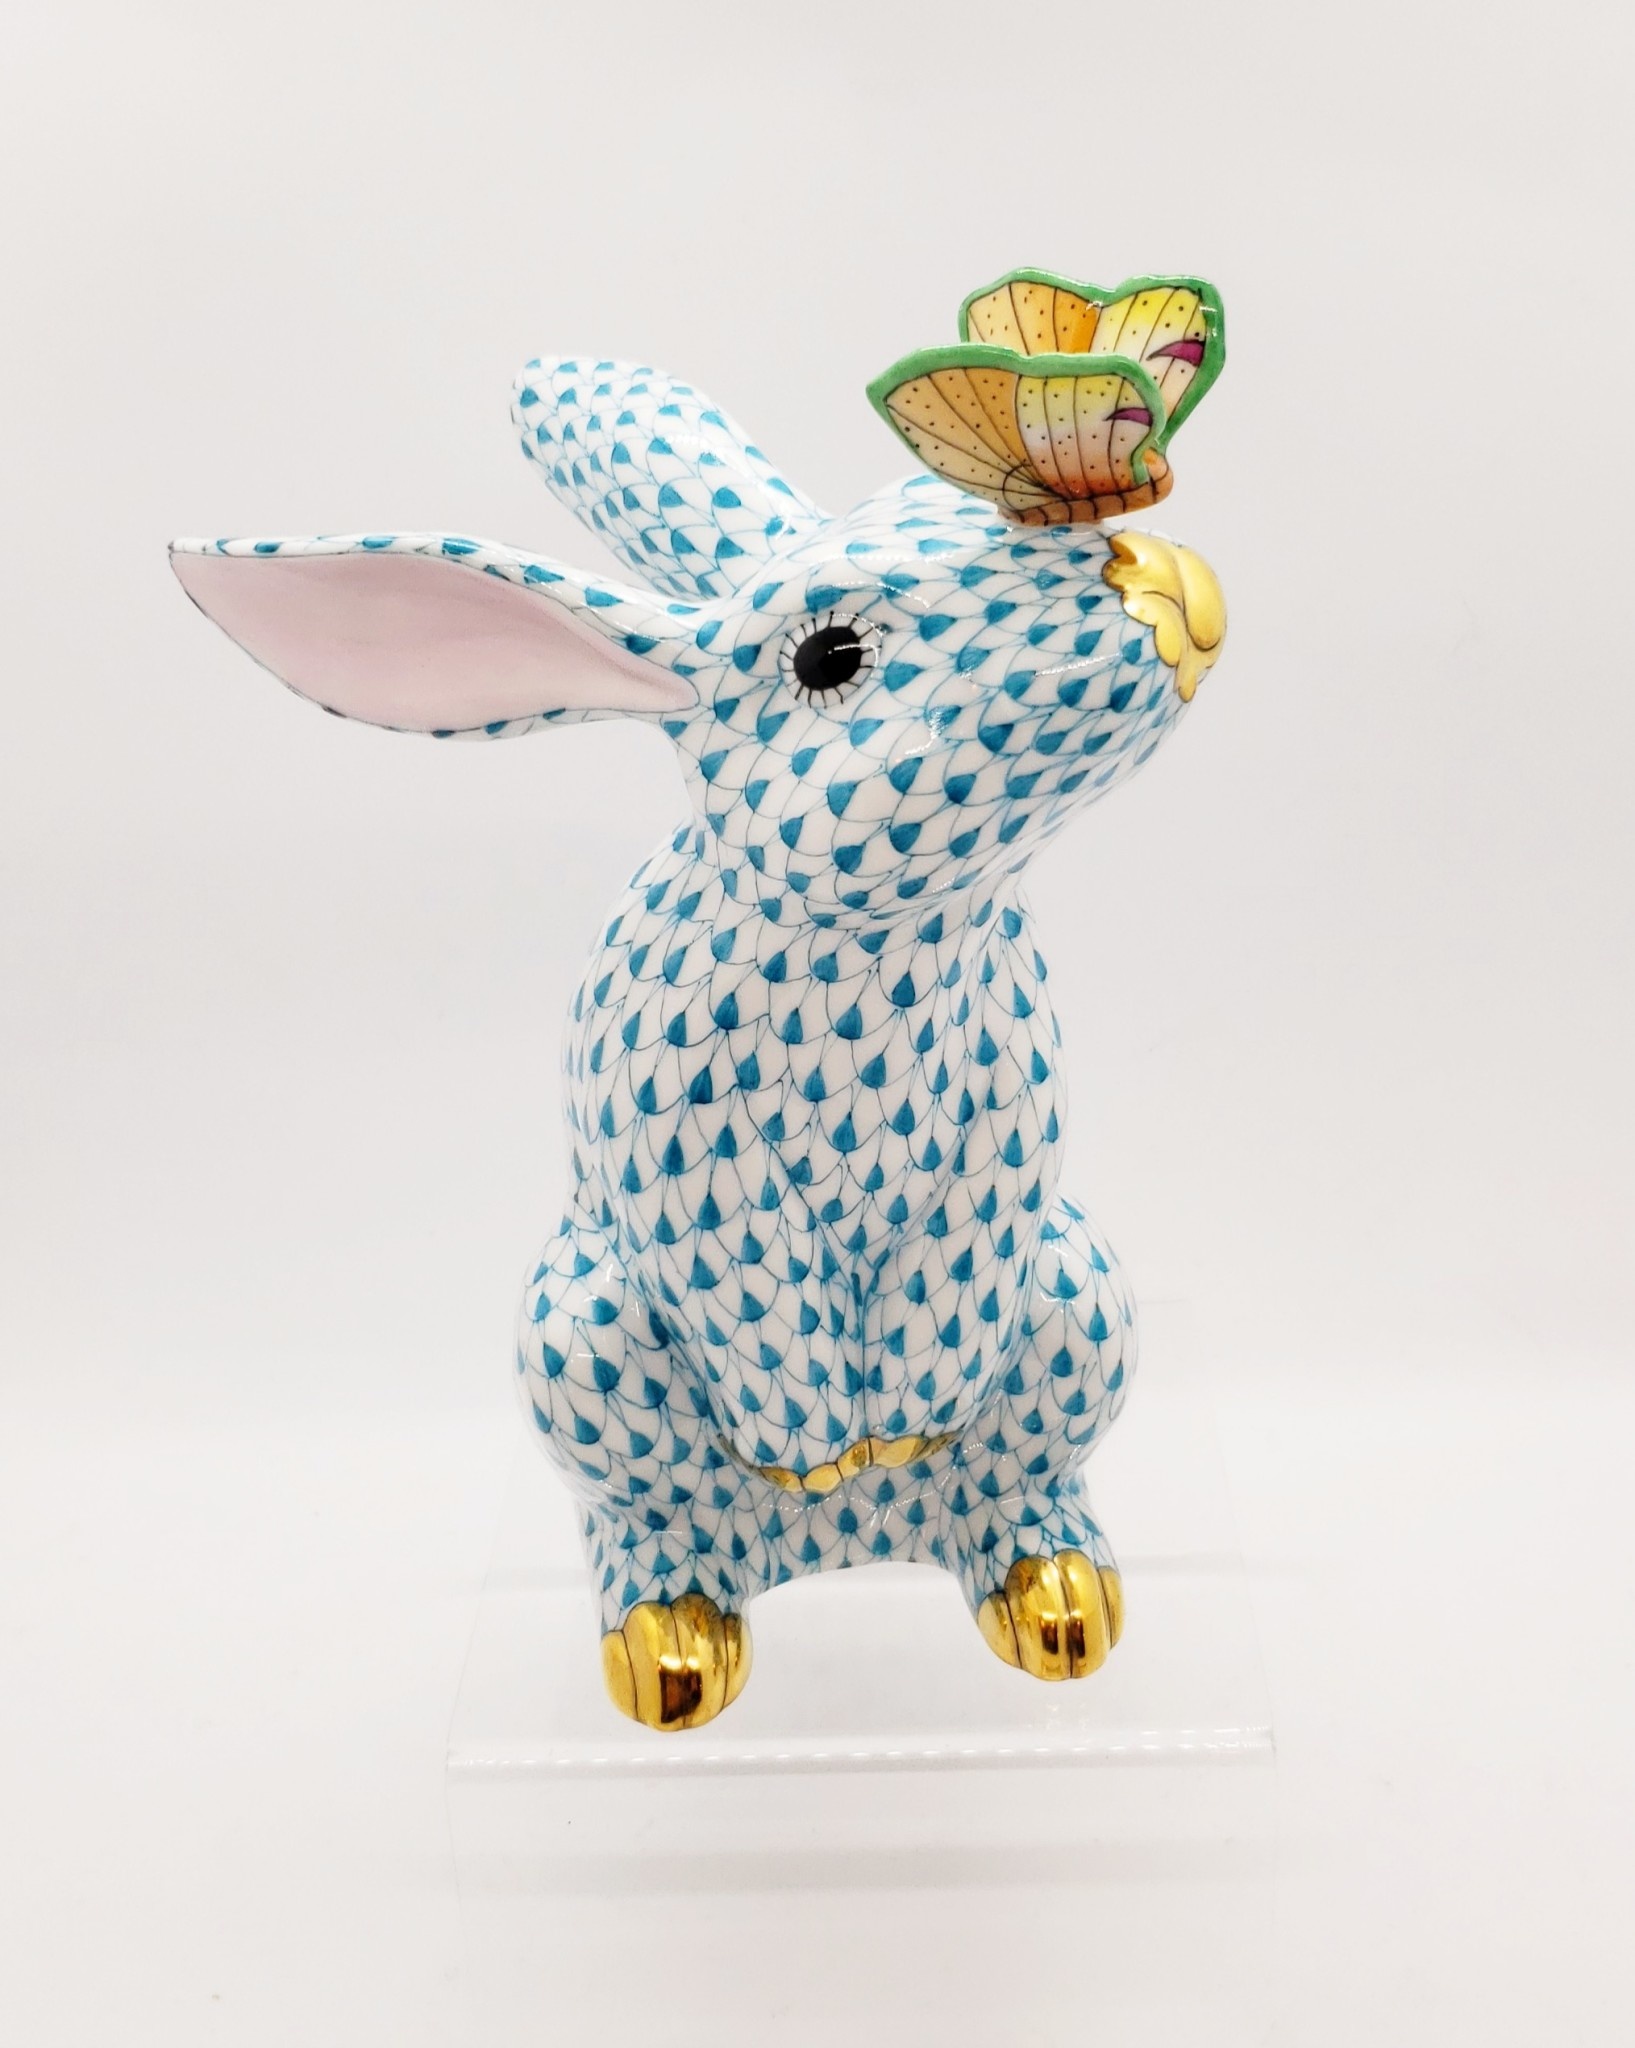 Bunny with Butterfly on Nose Figurines - Fishnet Color - Herend